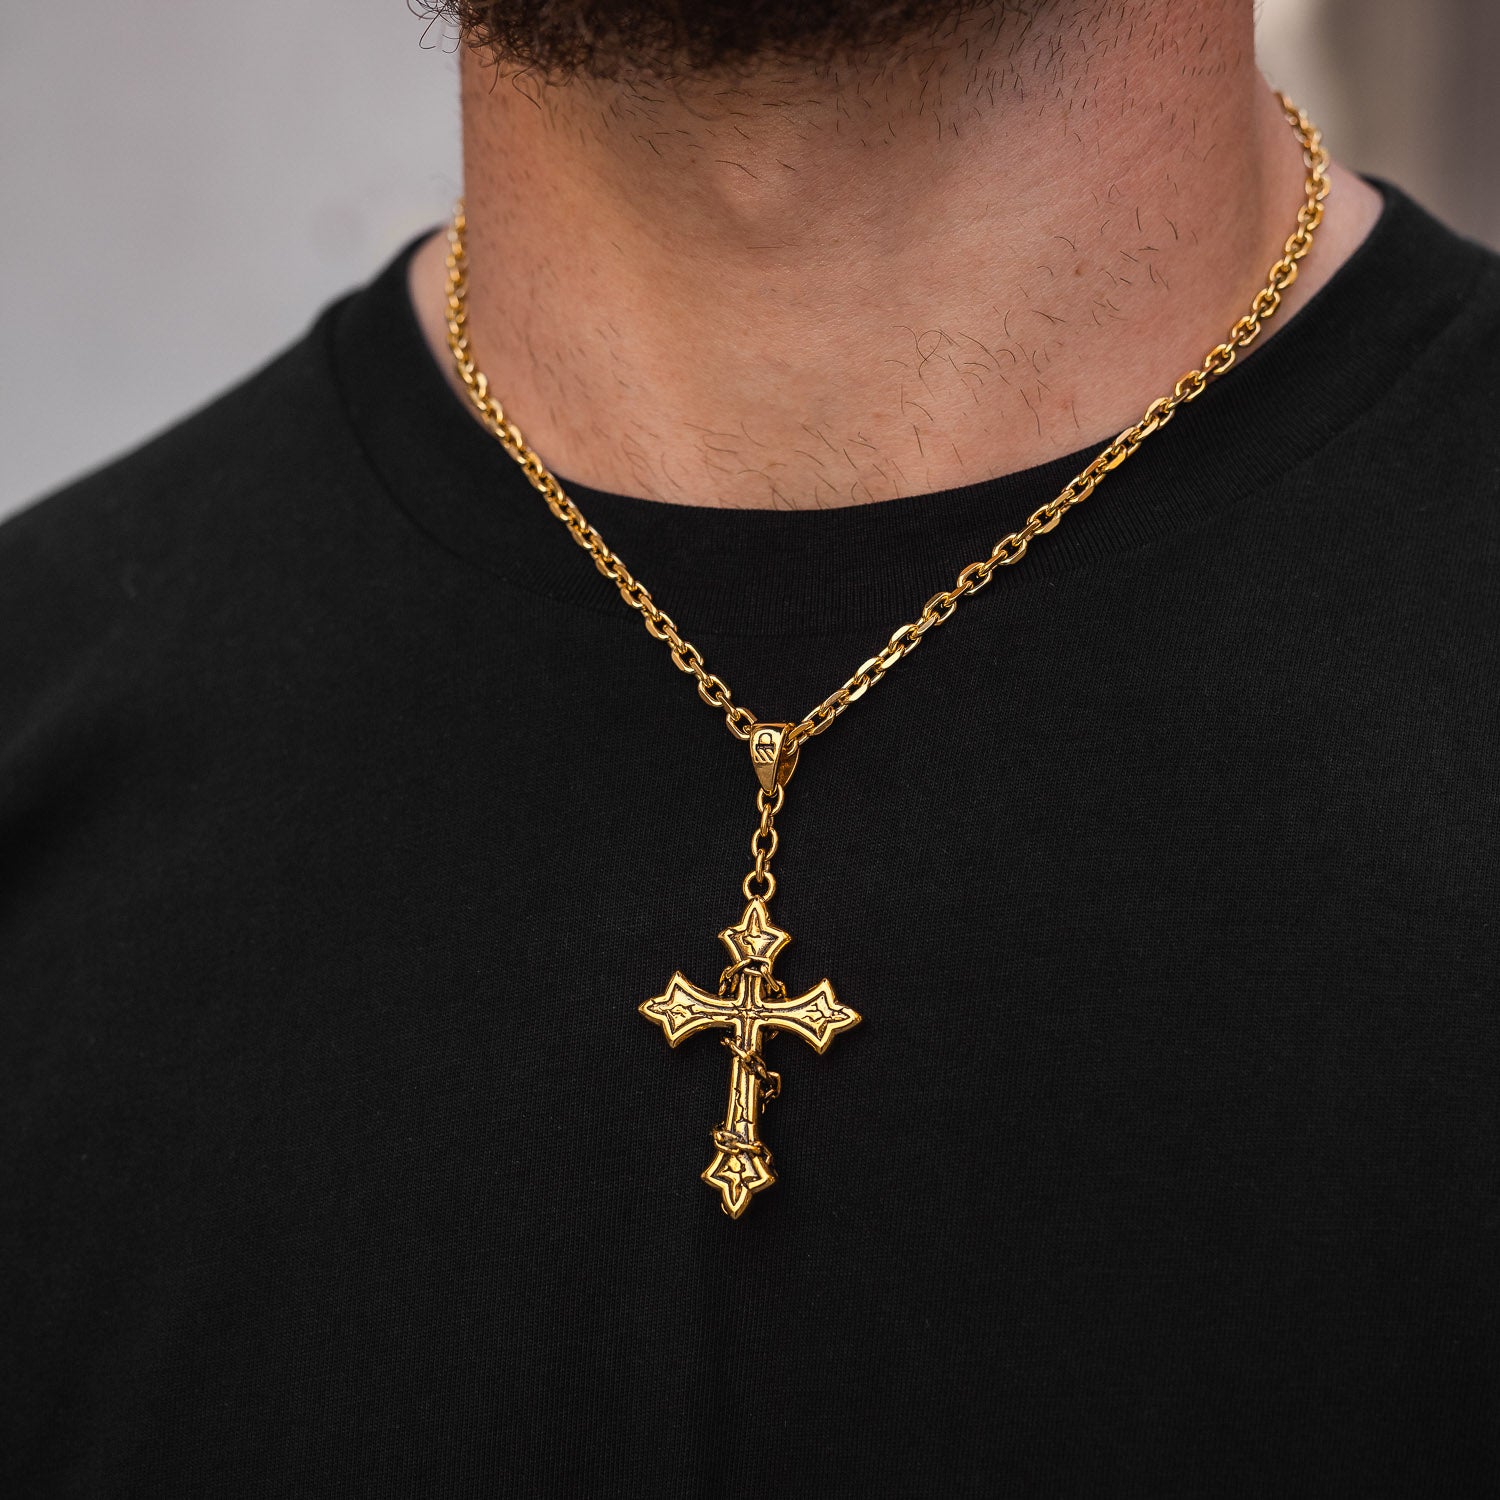 gold cross pendant necklace on chain by statement